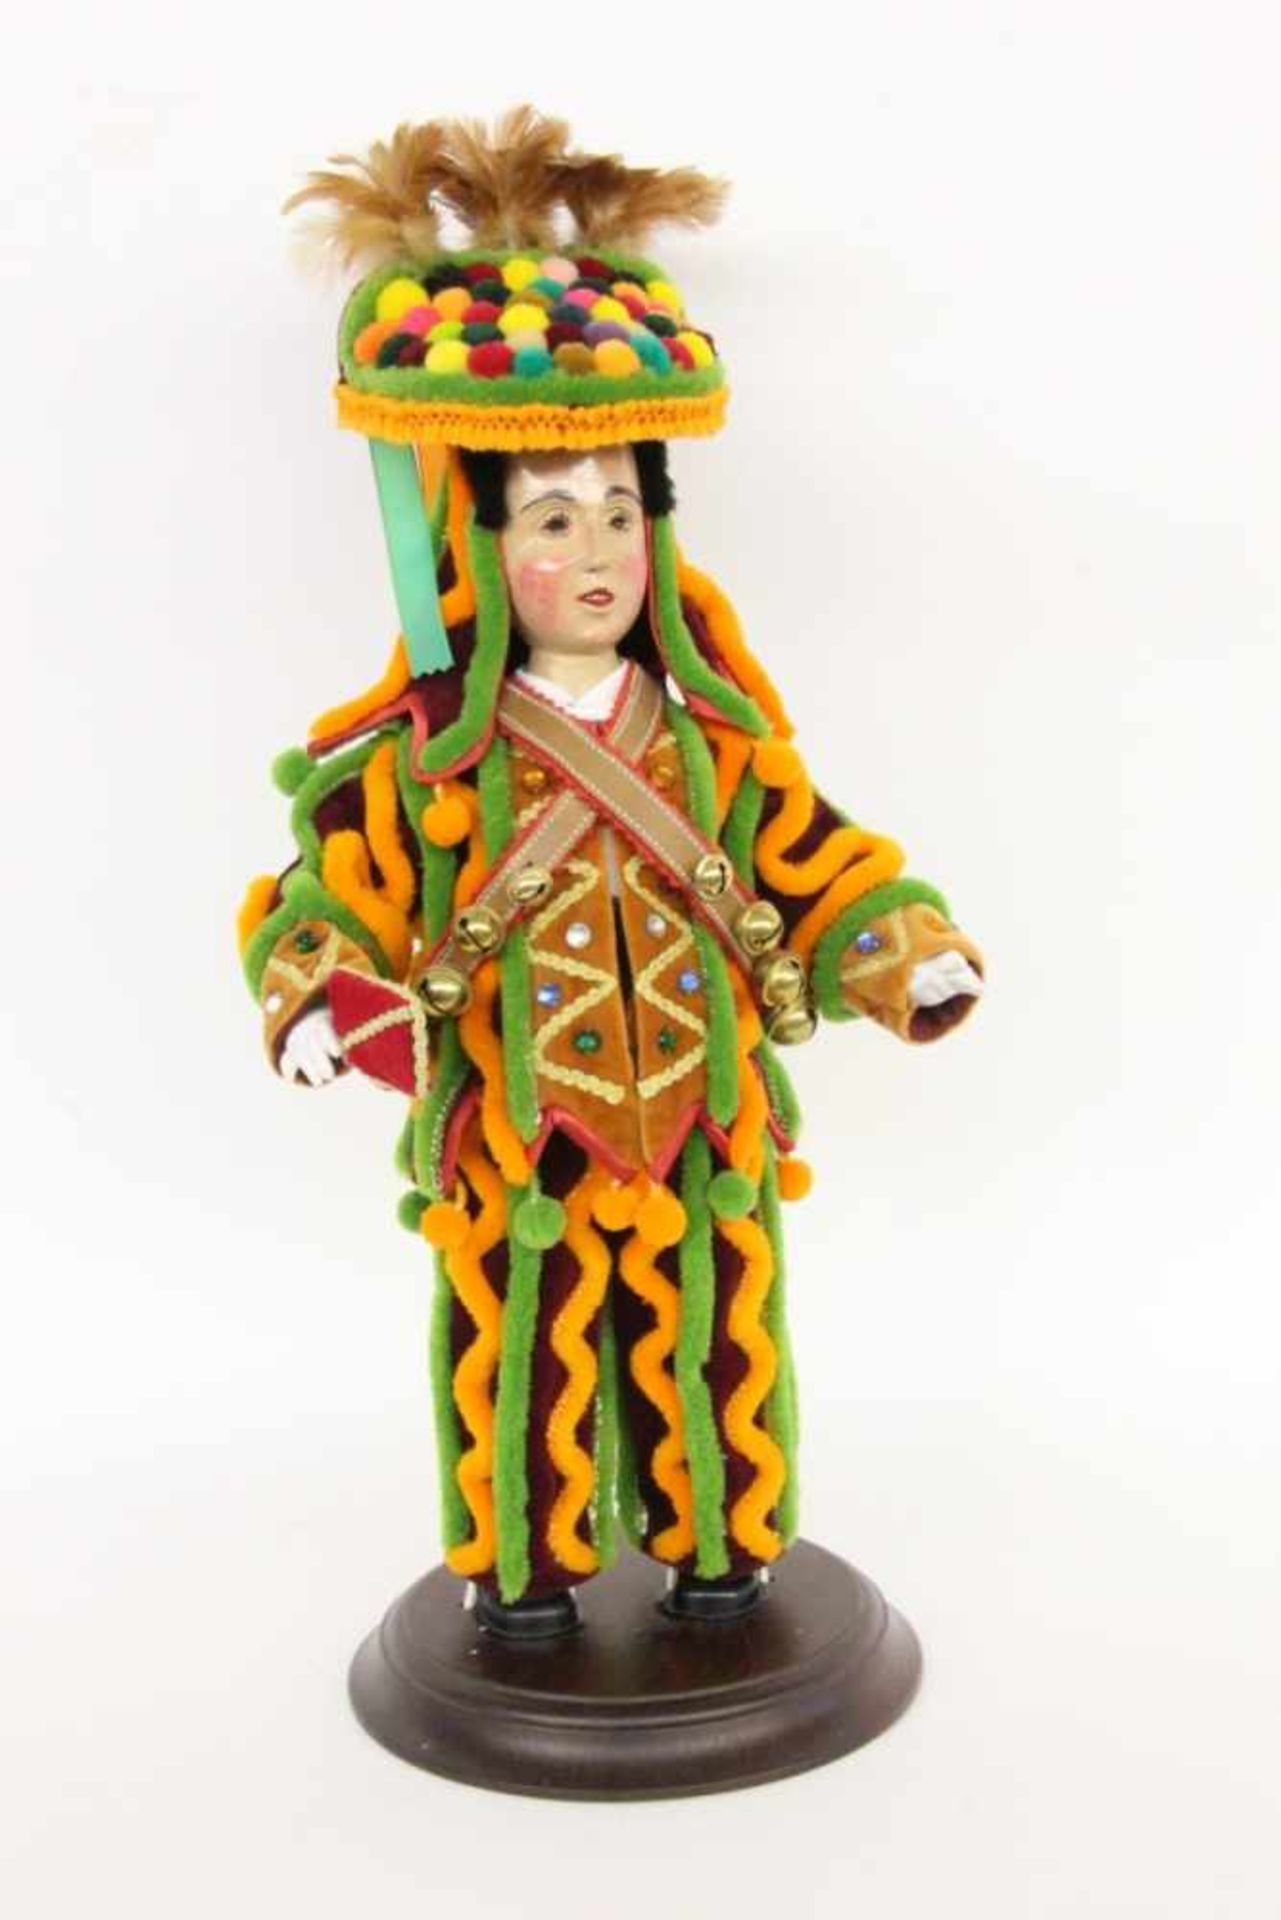 ''AN ALEMANNIC FASNET / CARNIVAL DOLL Wood with traditional clothing. 47 cm highKeywords: